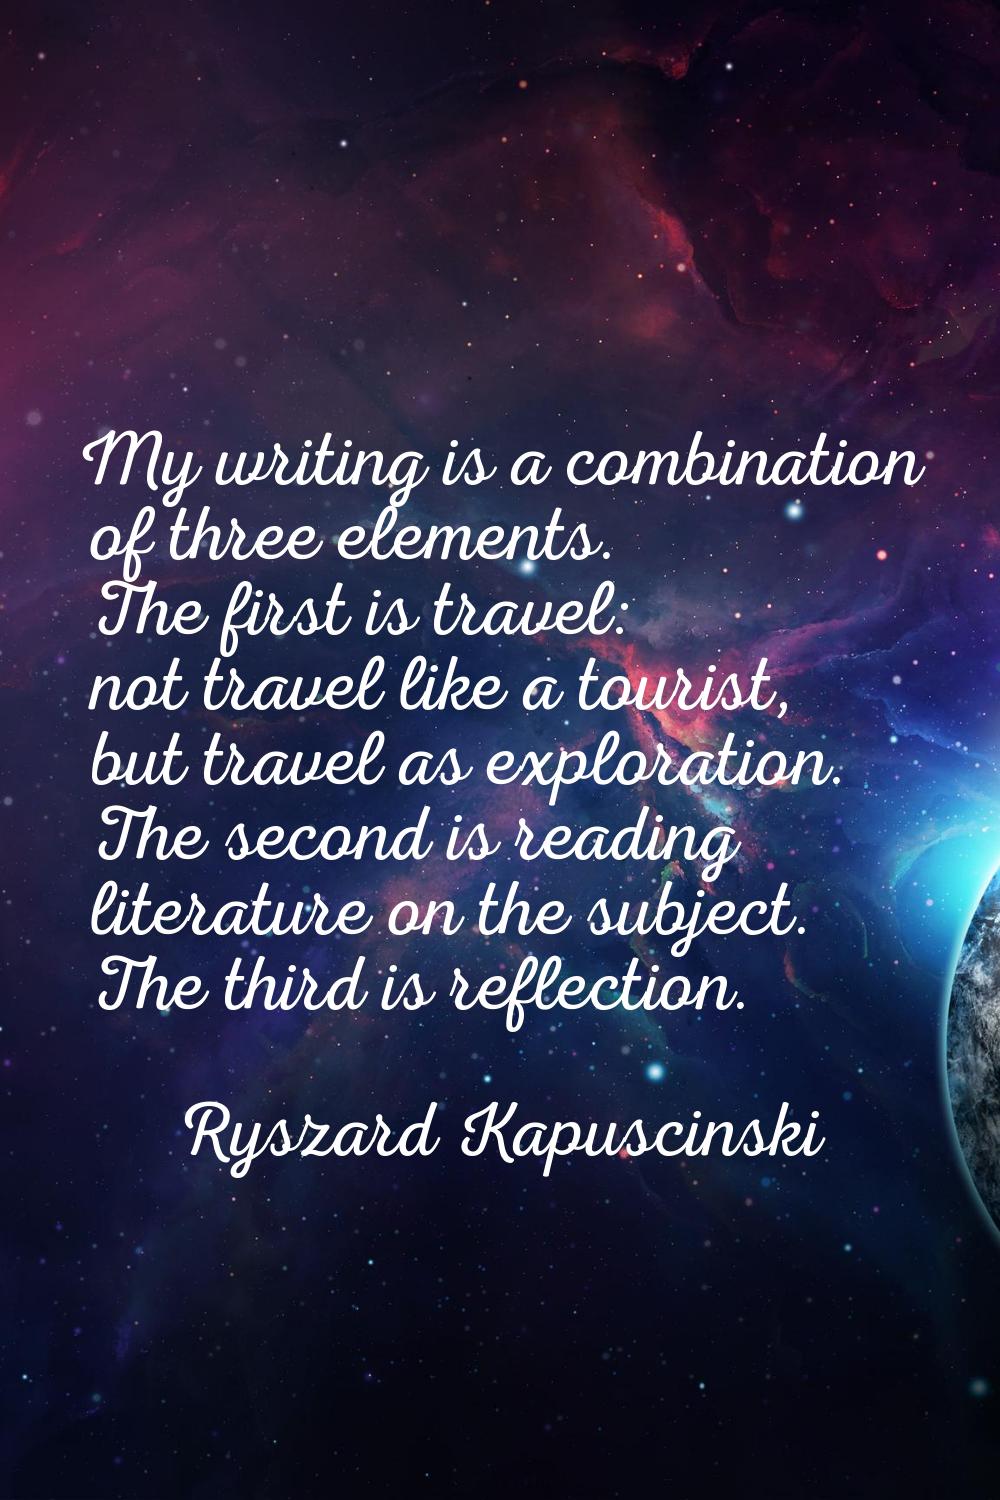 My writing is a combination of three elements. The first is travel: not travel like a tourist, but 